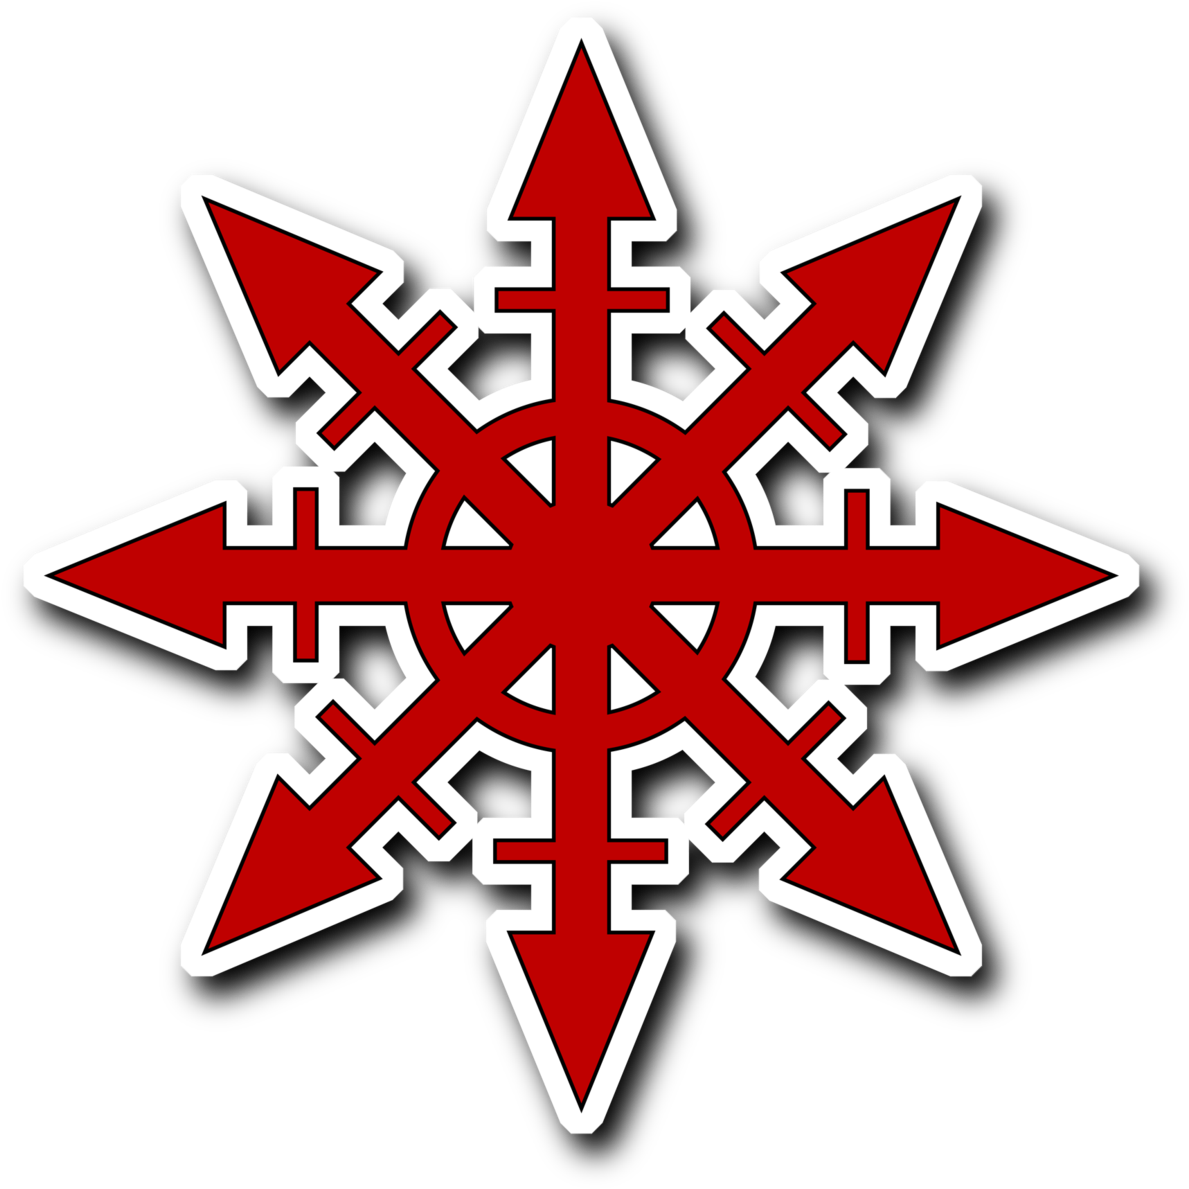 A Red And White Symbol With Arrows With Roanoke Star In The Background